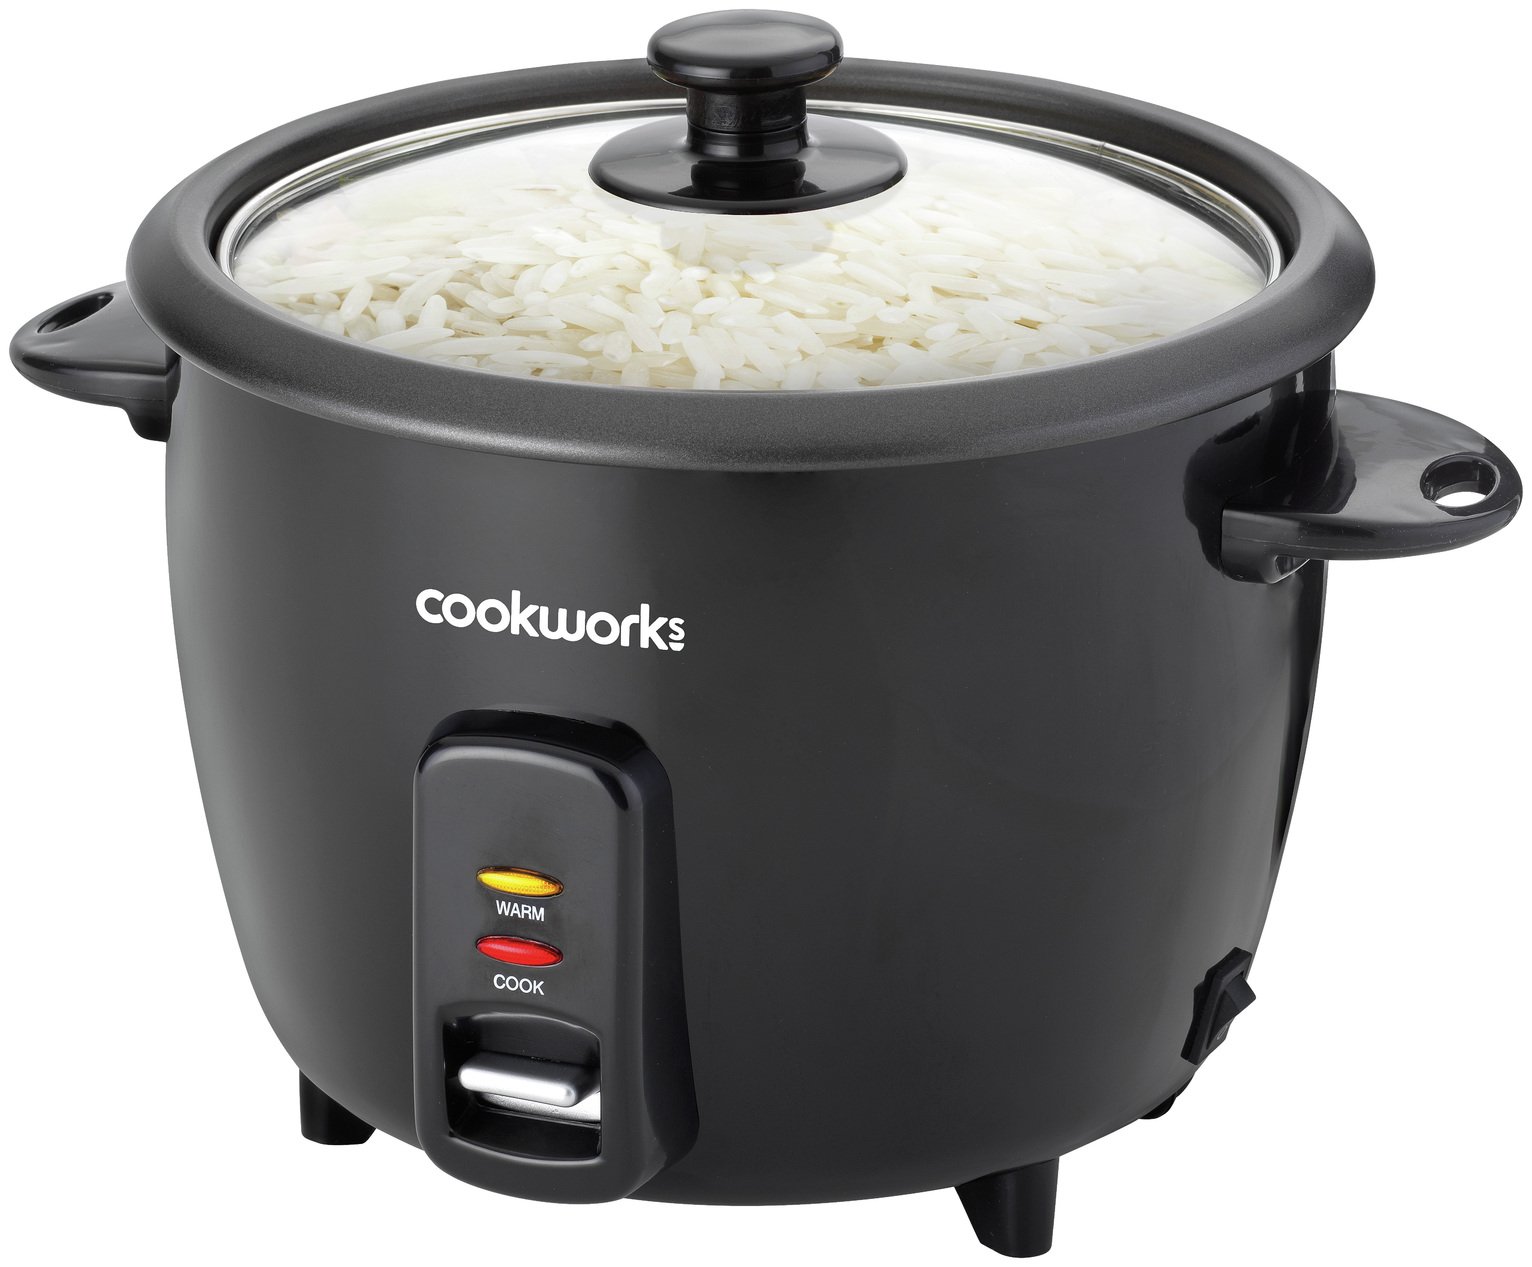 Cookworks 1.5L Rice Cooker Review